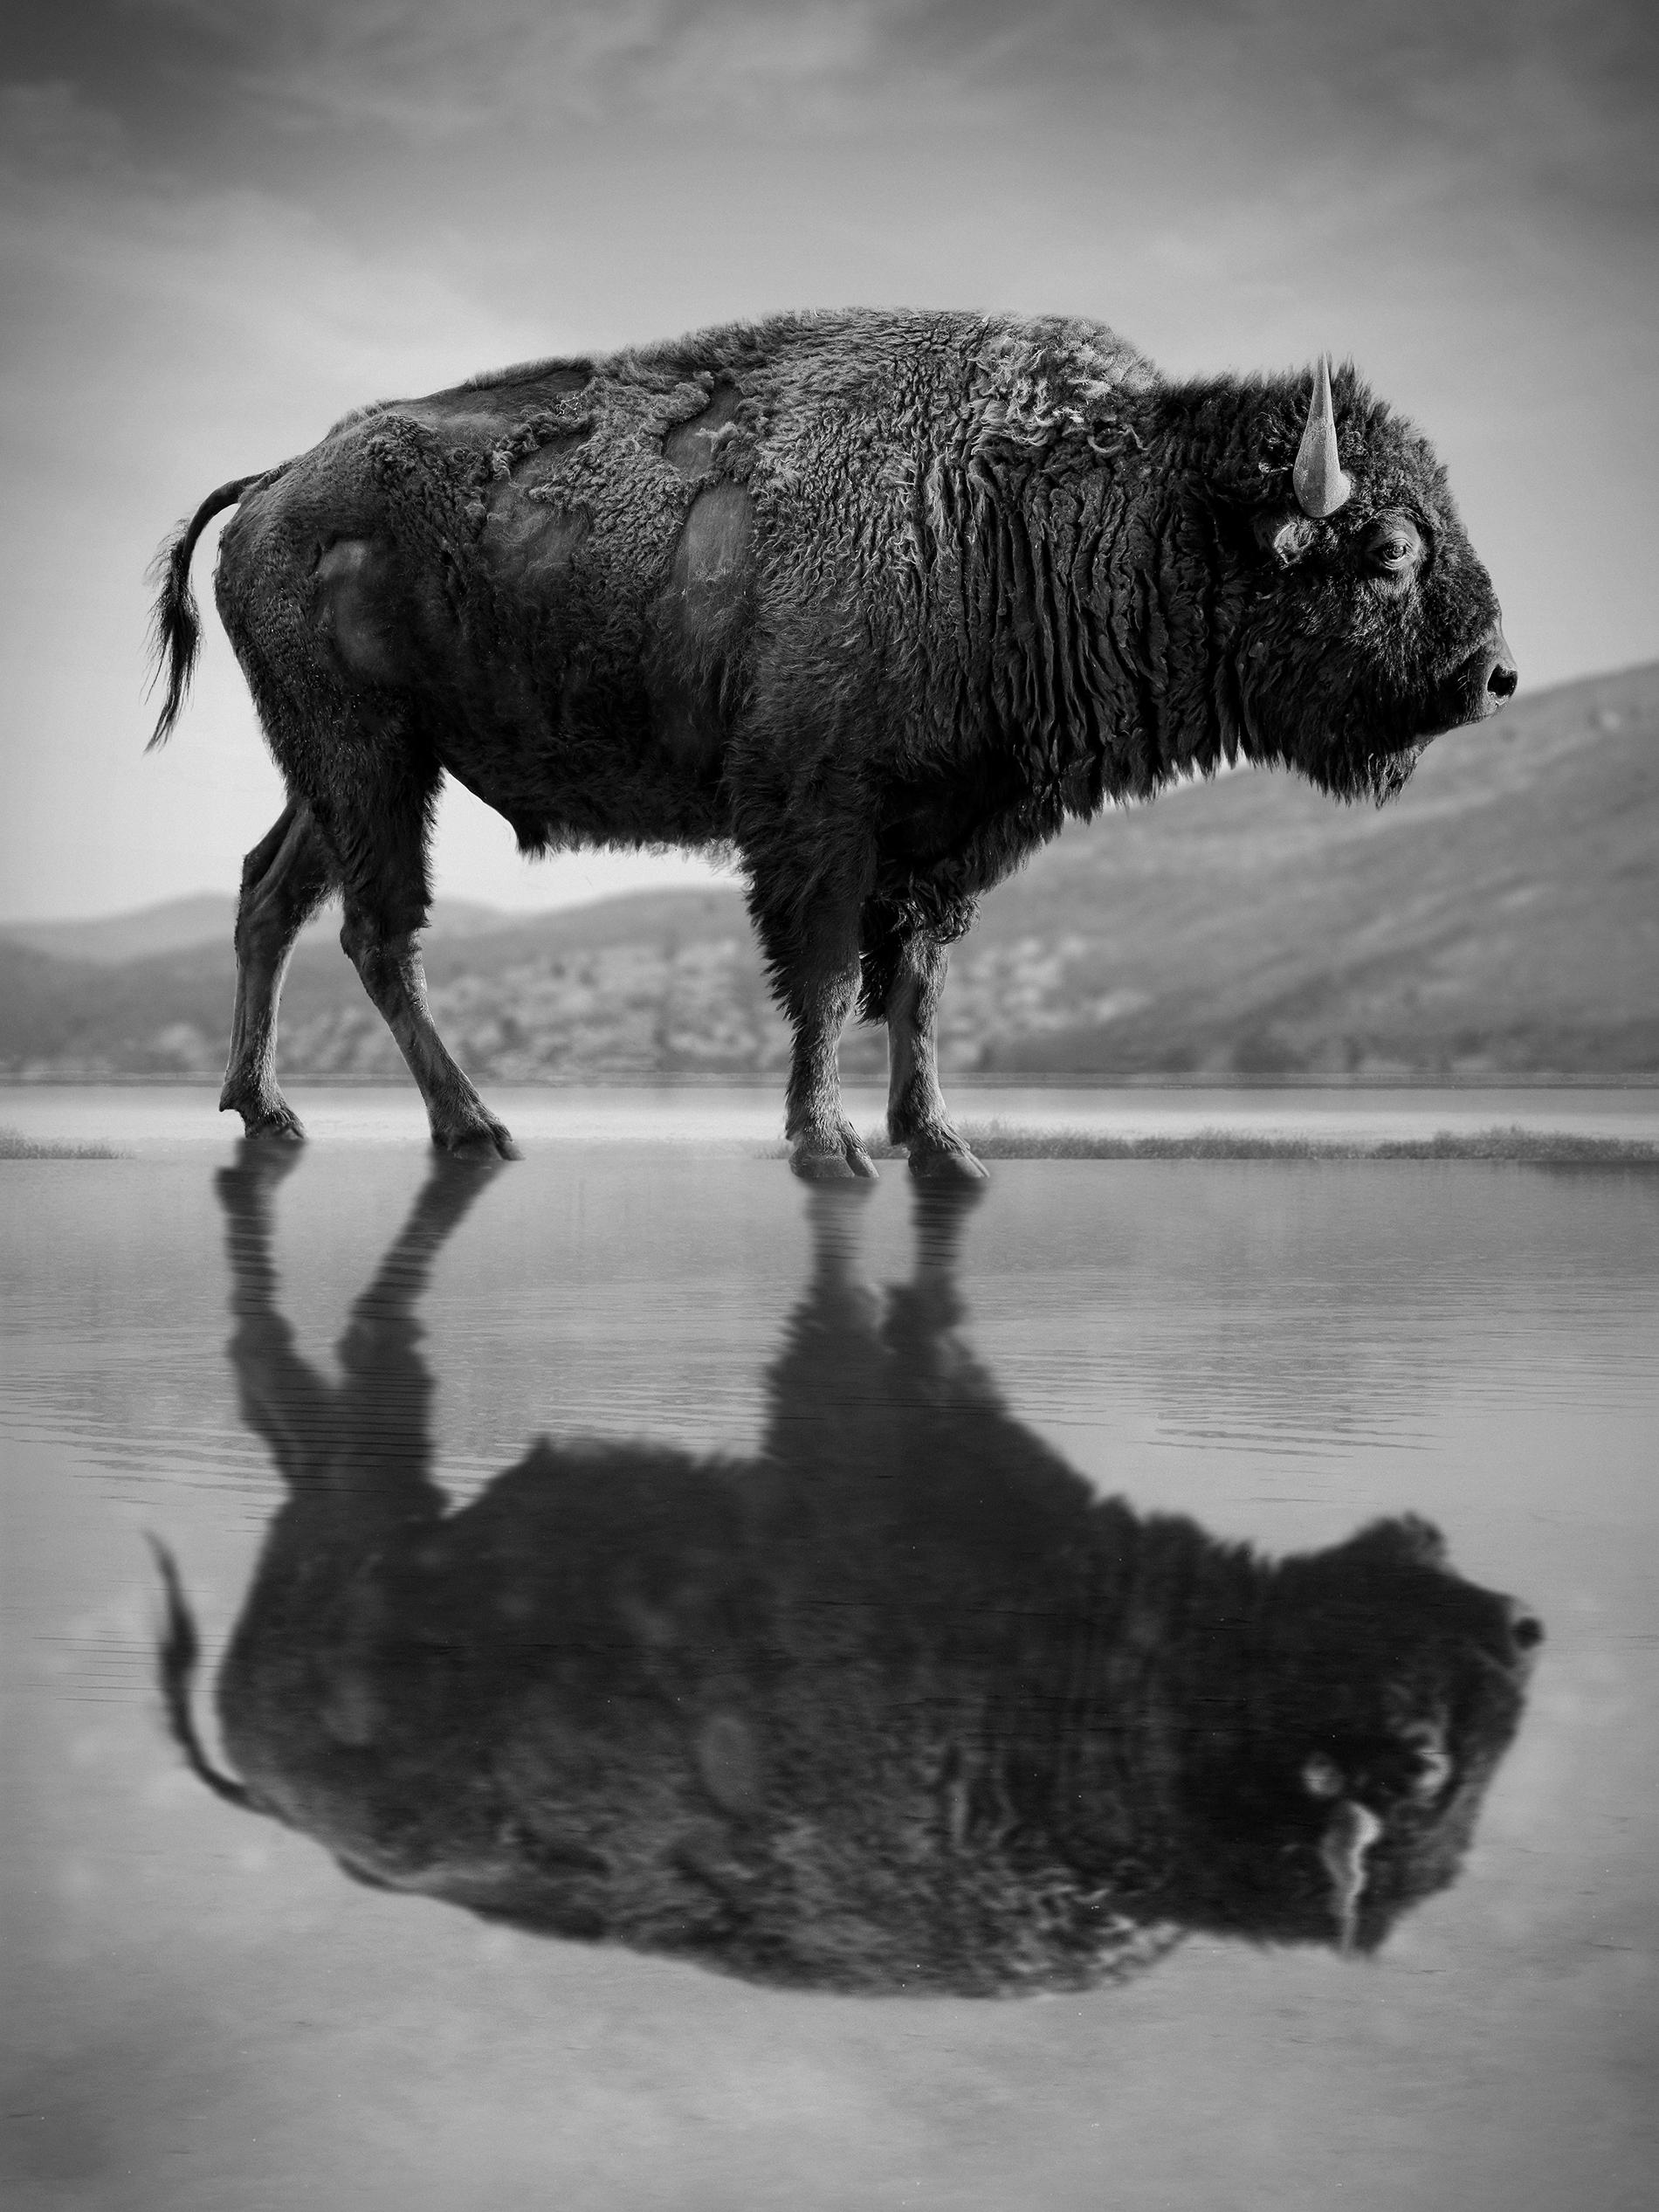 Shane Russeck Animal Print - "Old World" 24x30  Black & White Photography Bison Buffalo Unsigned Test Print